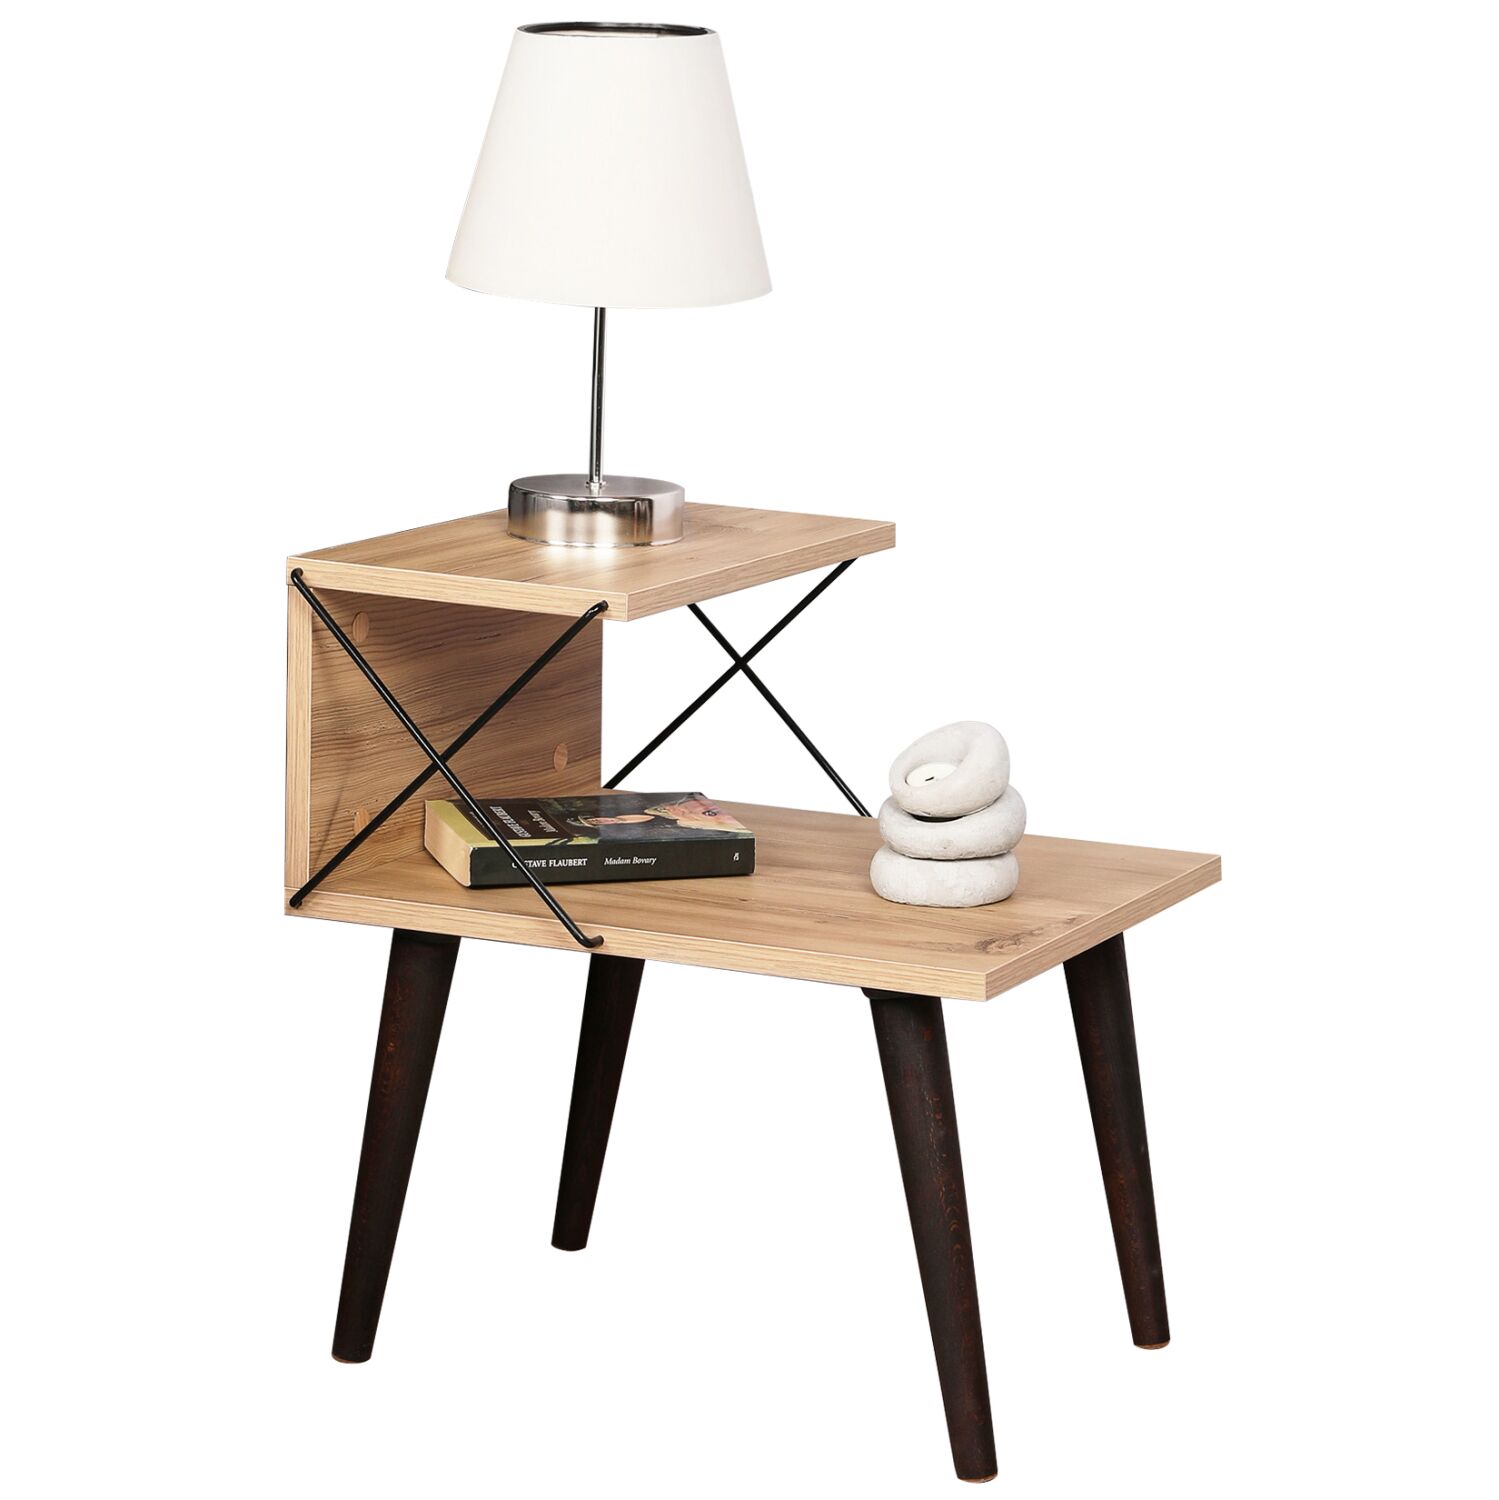 SIDE TABLE/NIGHTSTAND MELAMINE IN NATURAL COLOR 50x40x55Hcm.HM9434.01